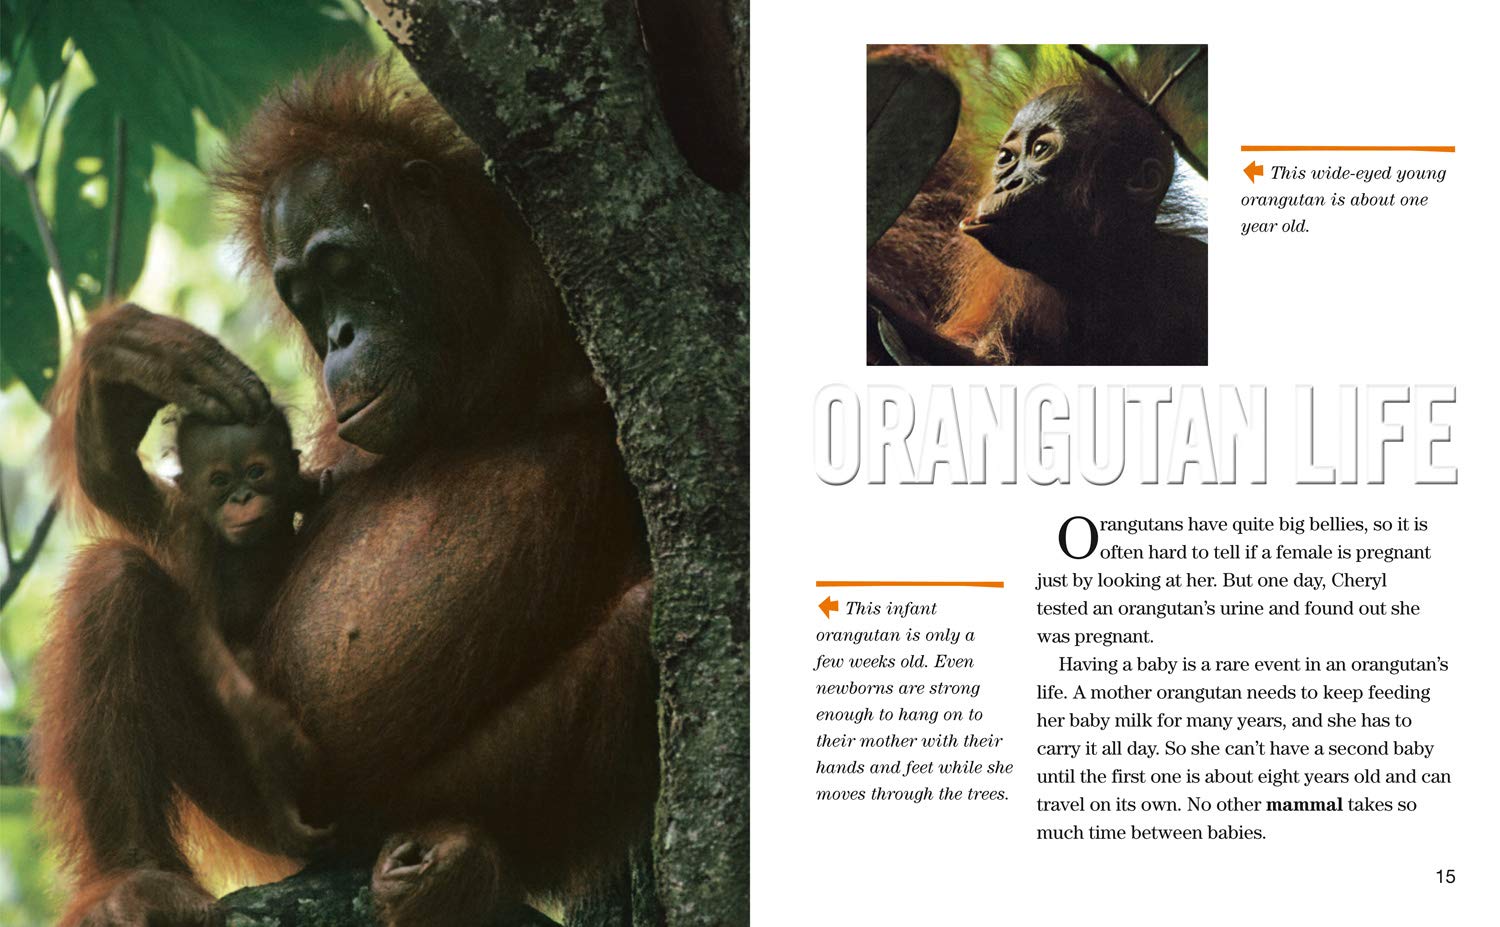 Face to Face with Orangutans: Level 5 (National Geographic Readers) - The English Bookshop Kuwait